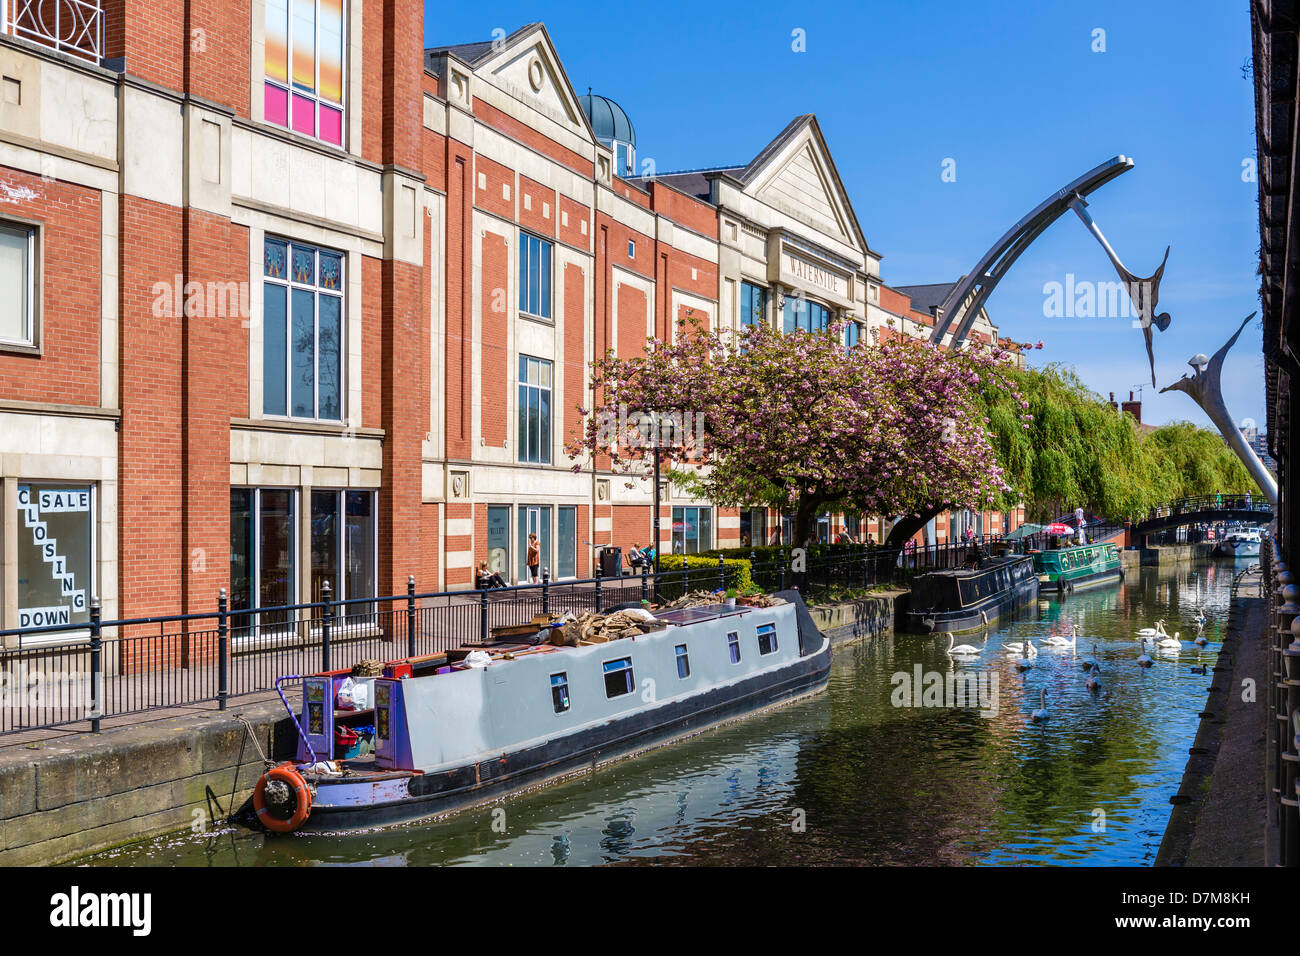 Narrowboat on the River Witham outside the Waterside Shopping Centre in the city centre, Lincoln, Lincolnshire, England, UK Stock Photo